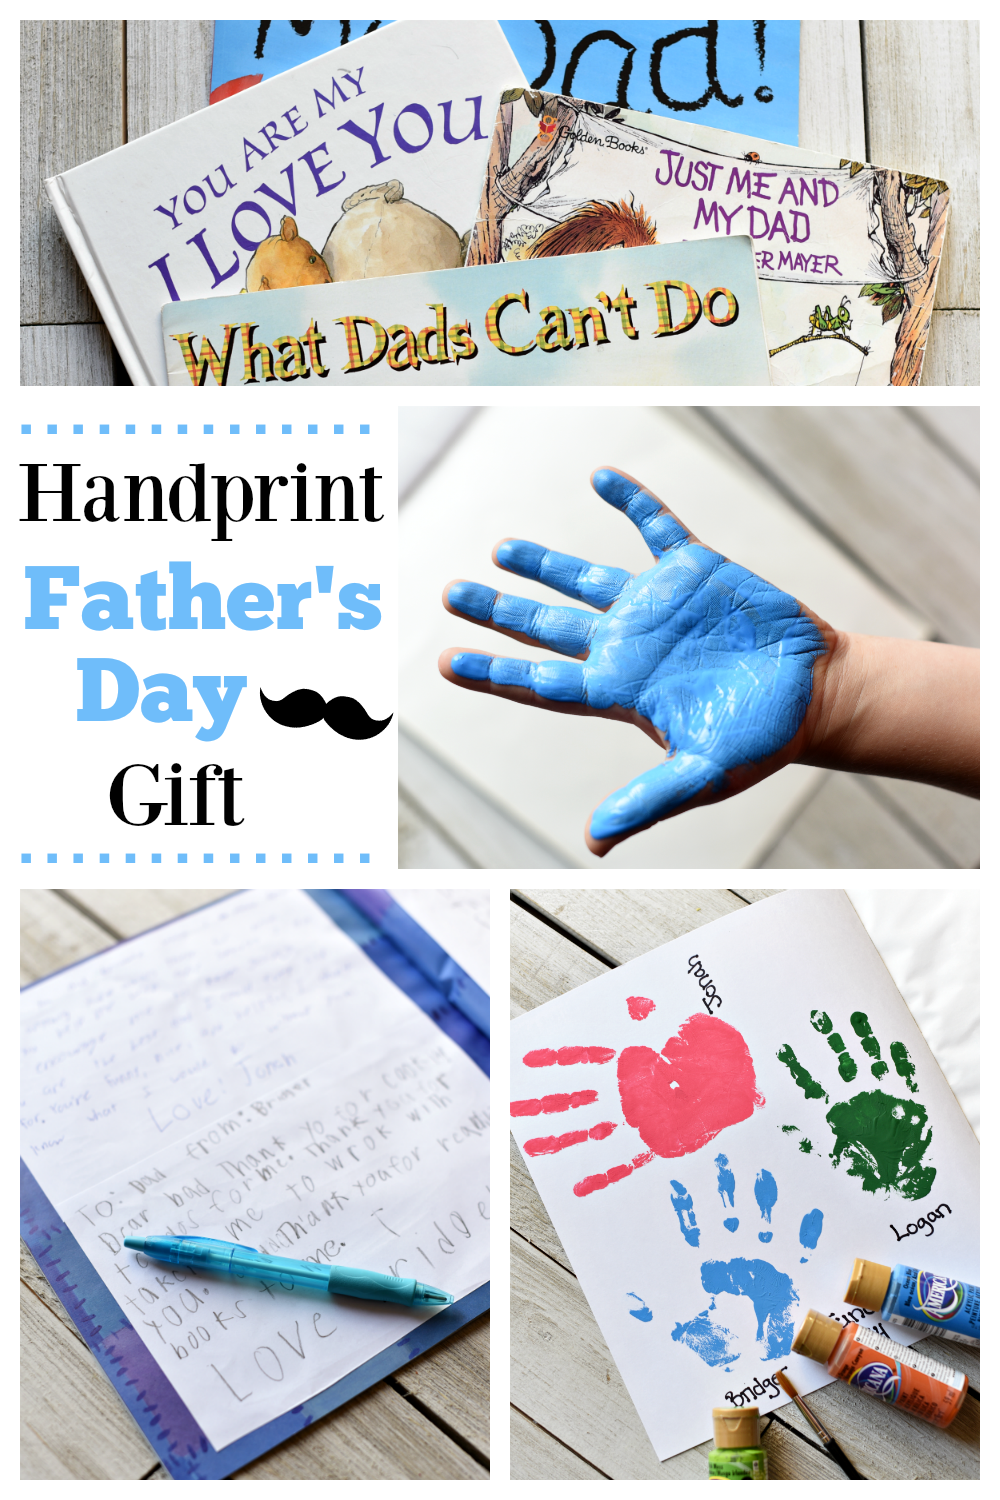 Handprint Father's Day Gifts- Give dad a simple and fun gift this Father's Day! This handprint gift idea is perfect for dad. #Father'sday #Father'sDaygift #Dadgifts #handprintgifts